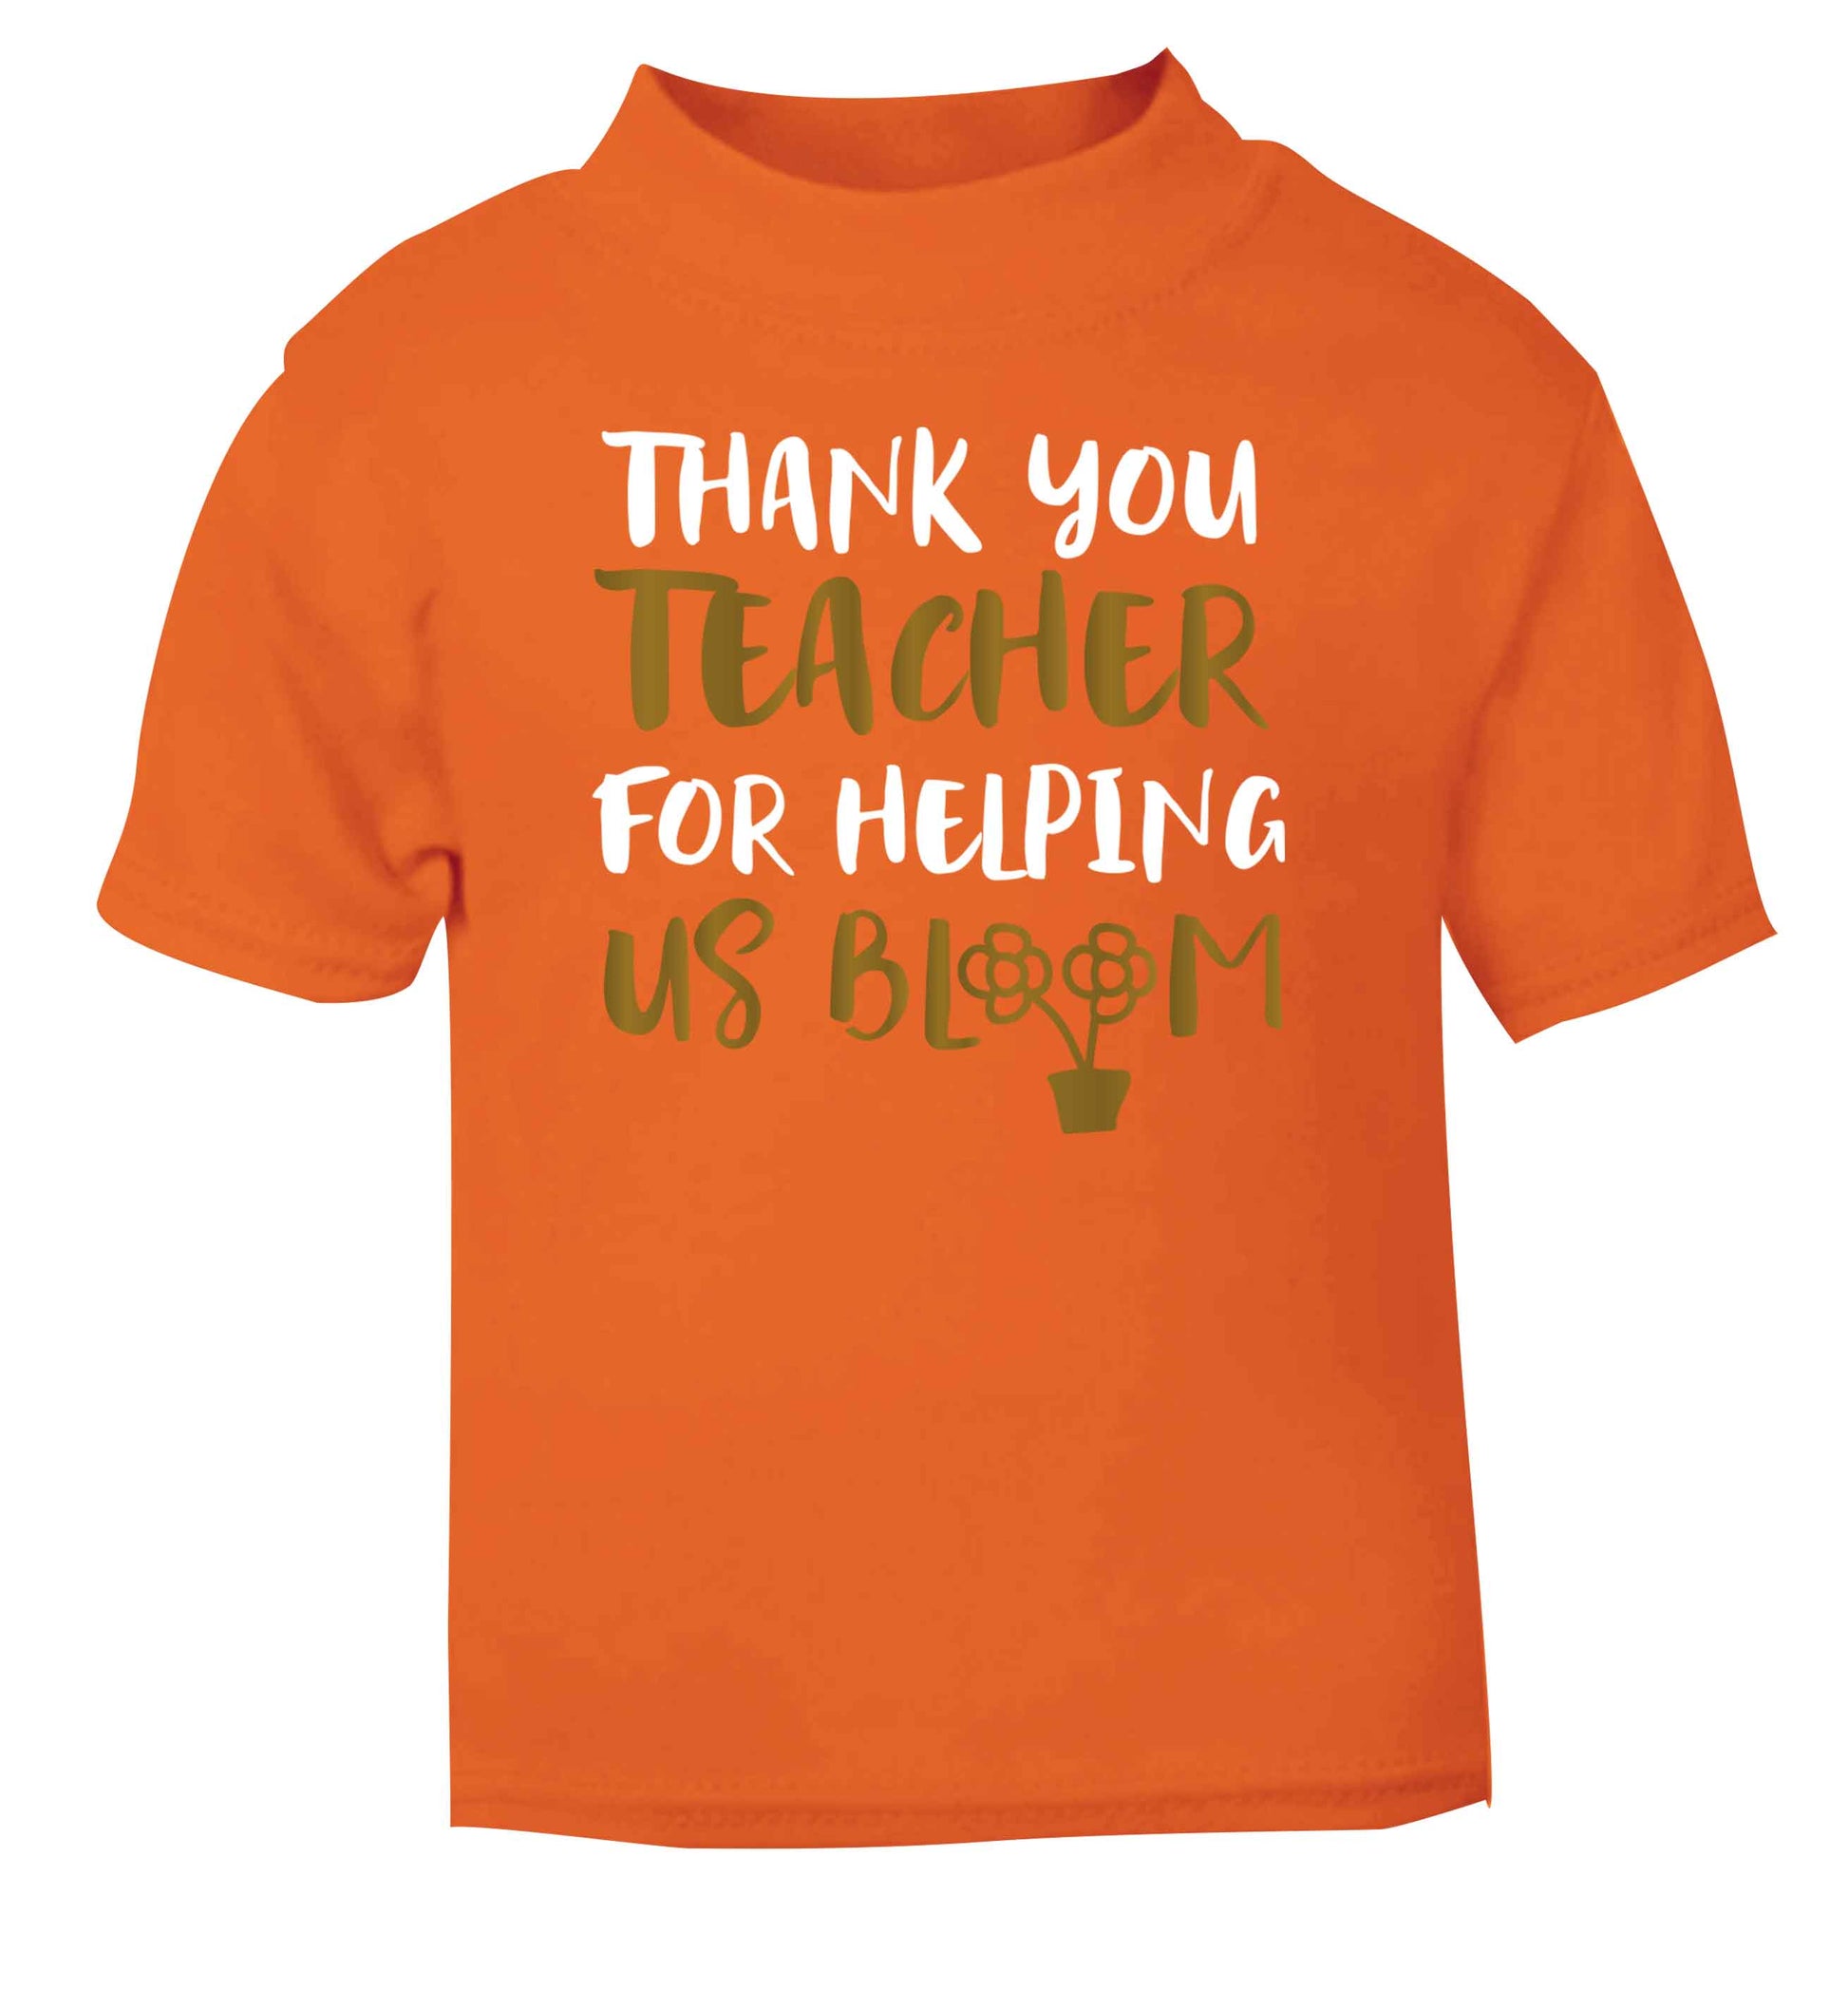 Thank you teacher for helping us bloom orange Baby Toddler Tshirt 2 Years